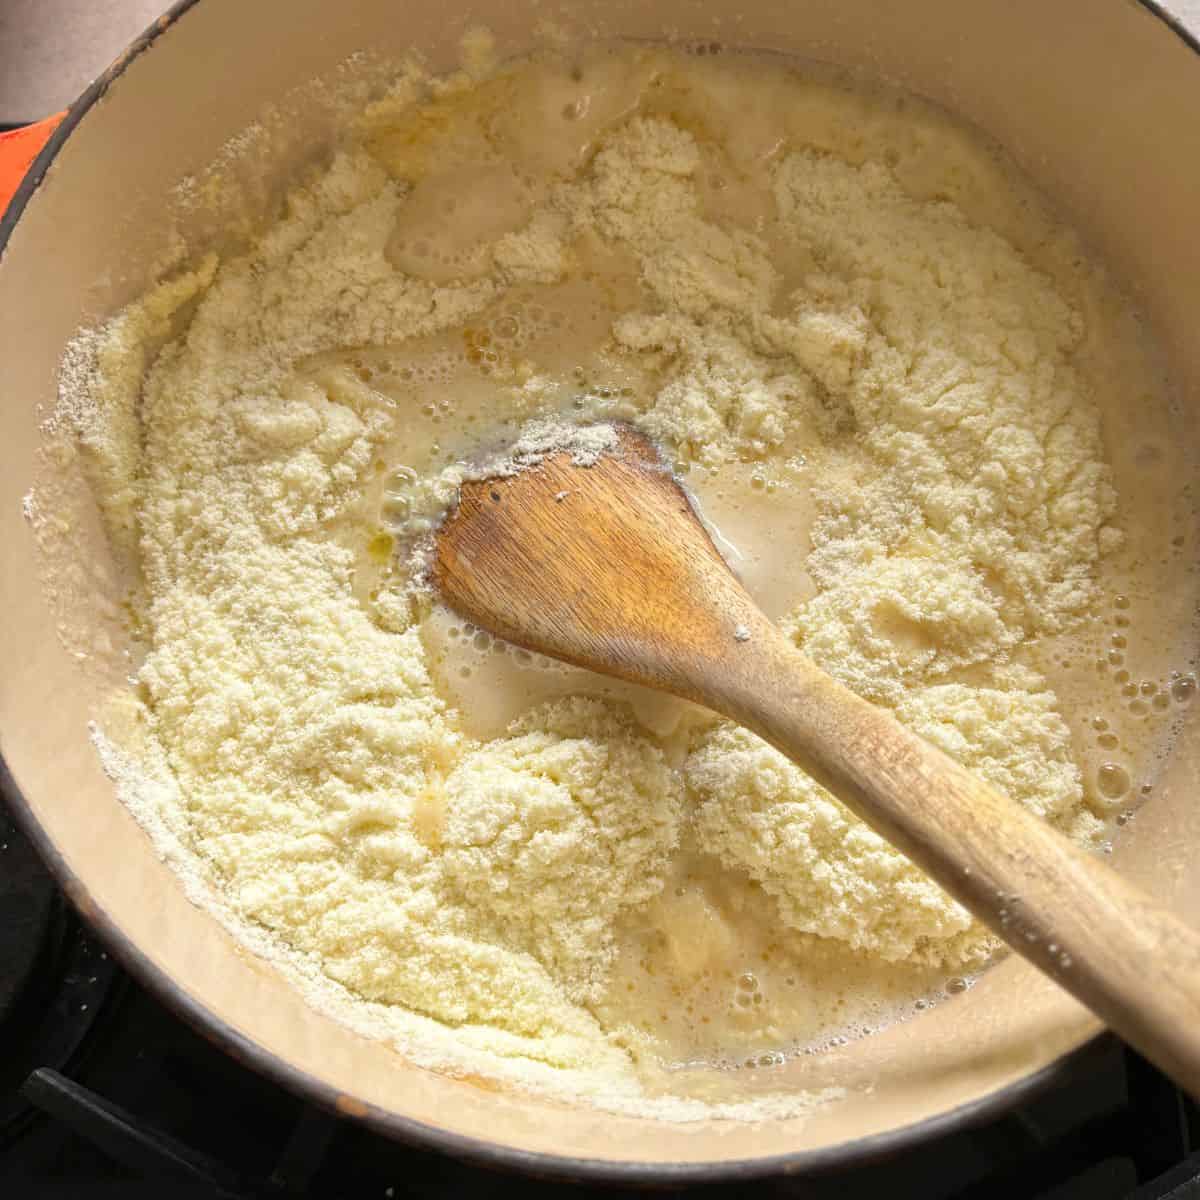 Powdered milk added to mixture in pan.